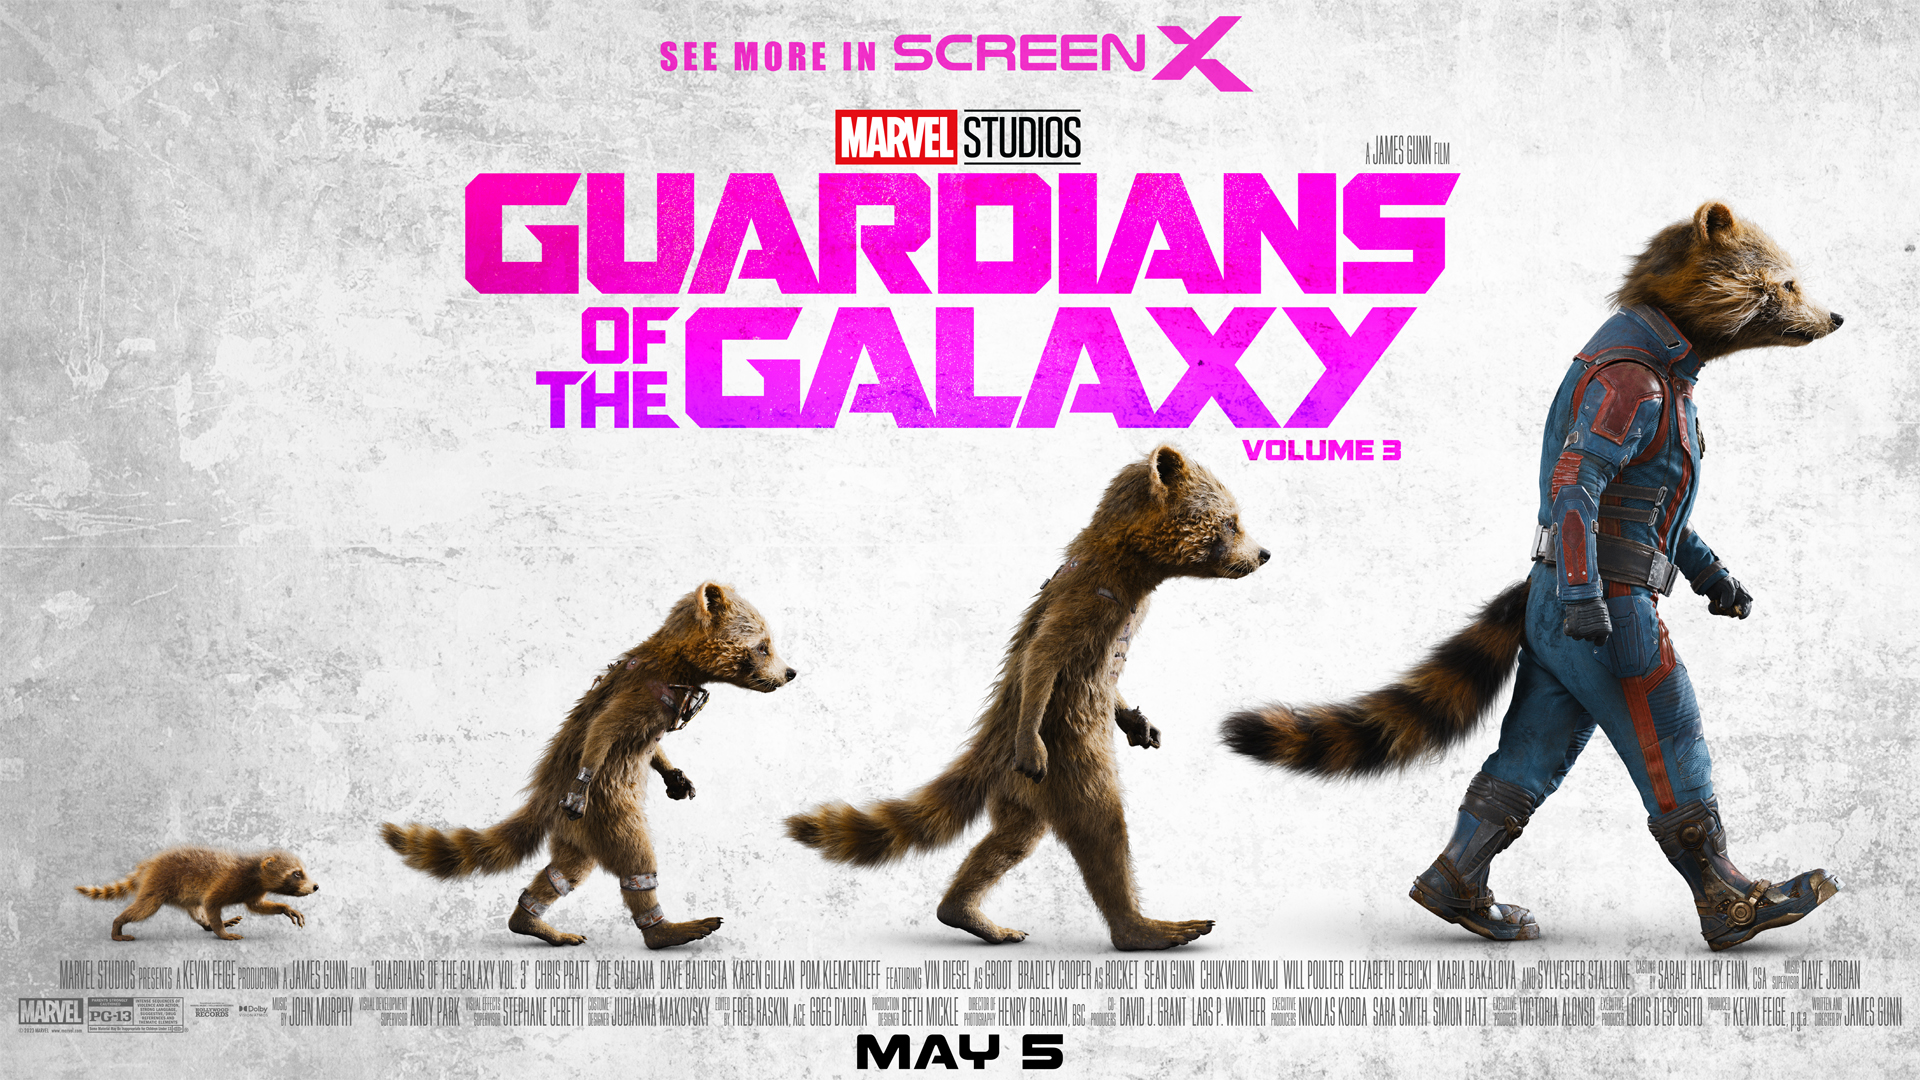 Guardians of the Galaxy vol. 3 ScreenX banner